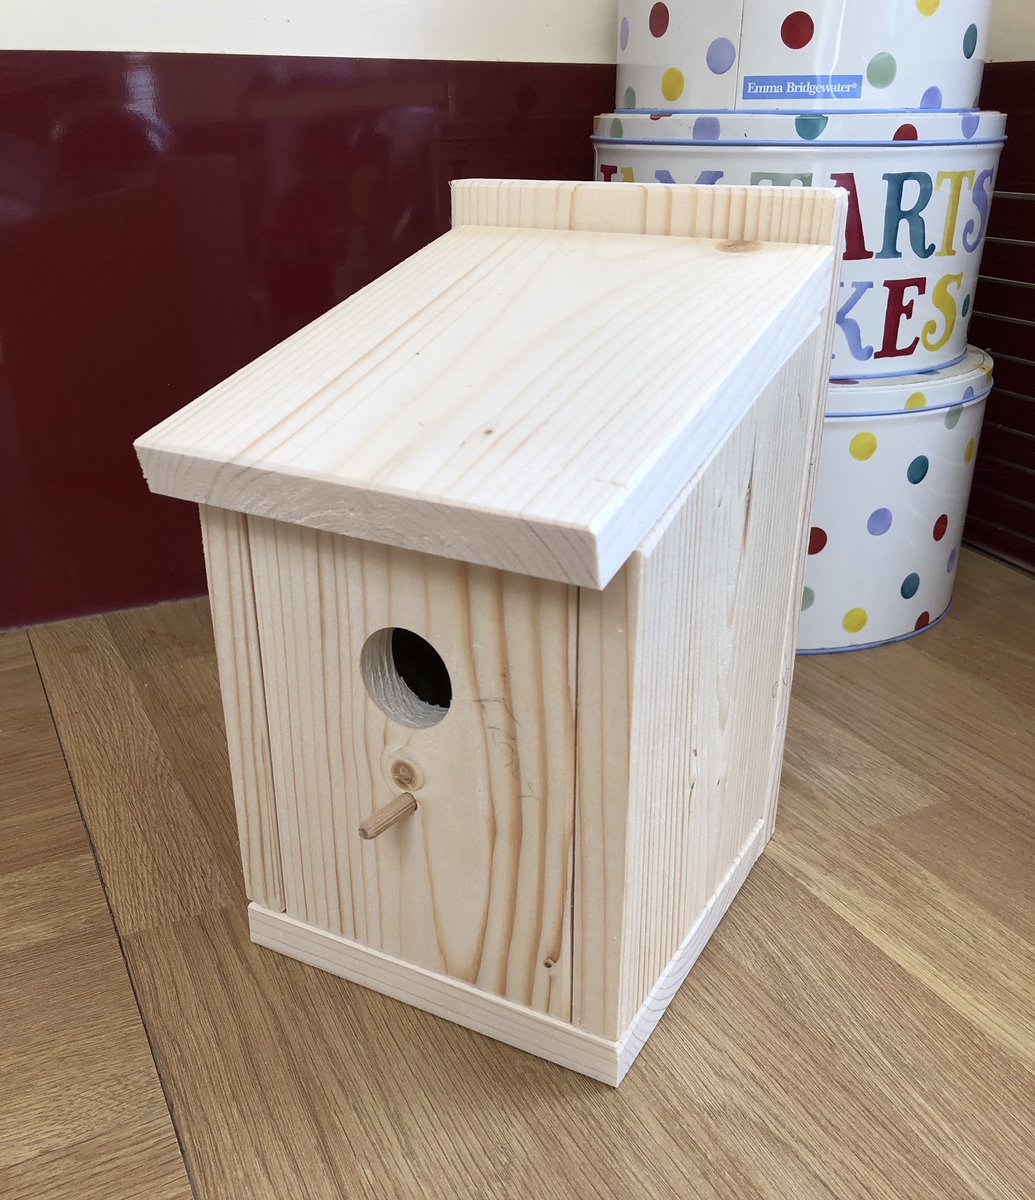 On the @WalkerClose34 inpatient unit we are so excited to have these homemade bird boxes to put together with our patients 🐦🌈#personcentredplanning #LDnursing @NSFTtweets @starwards